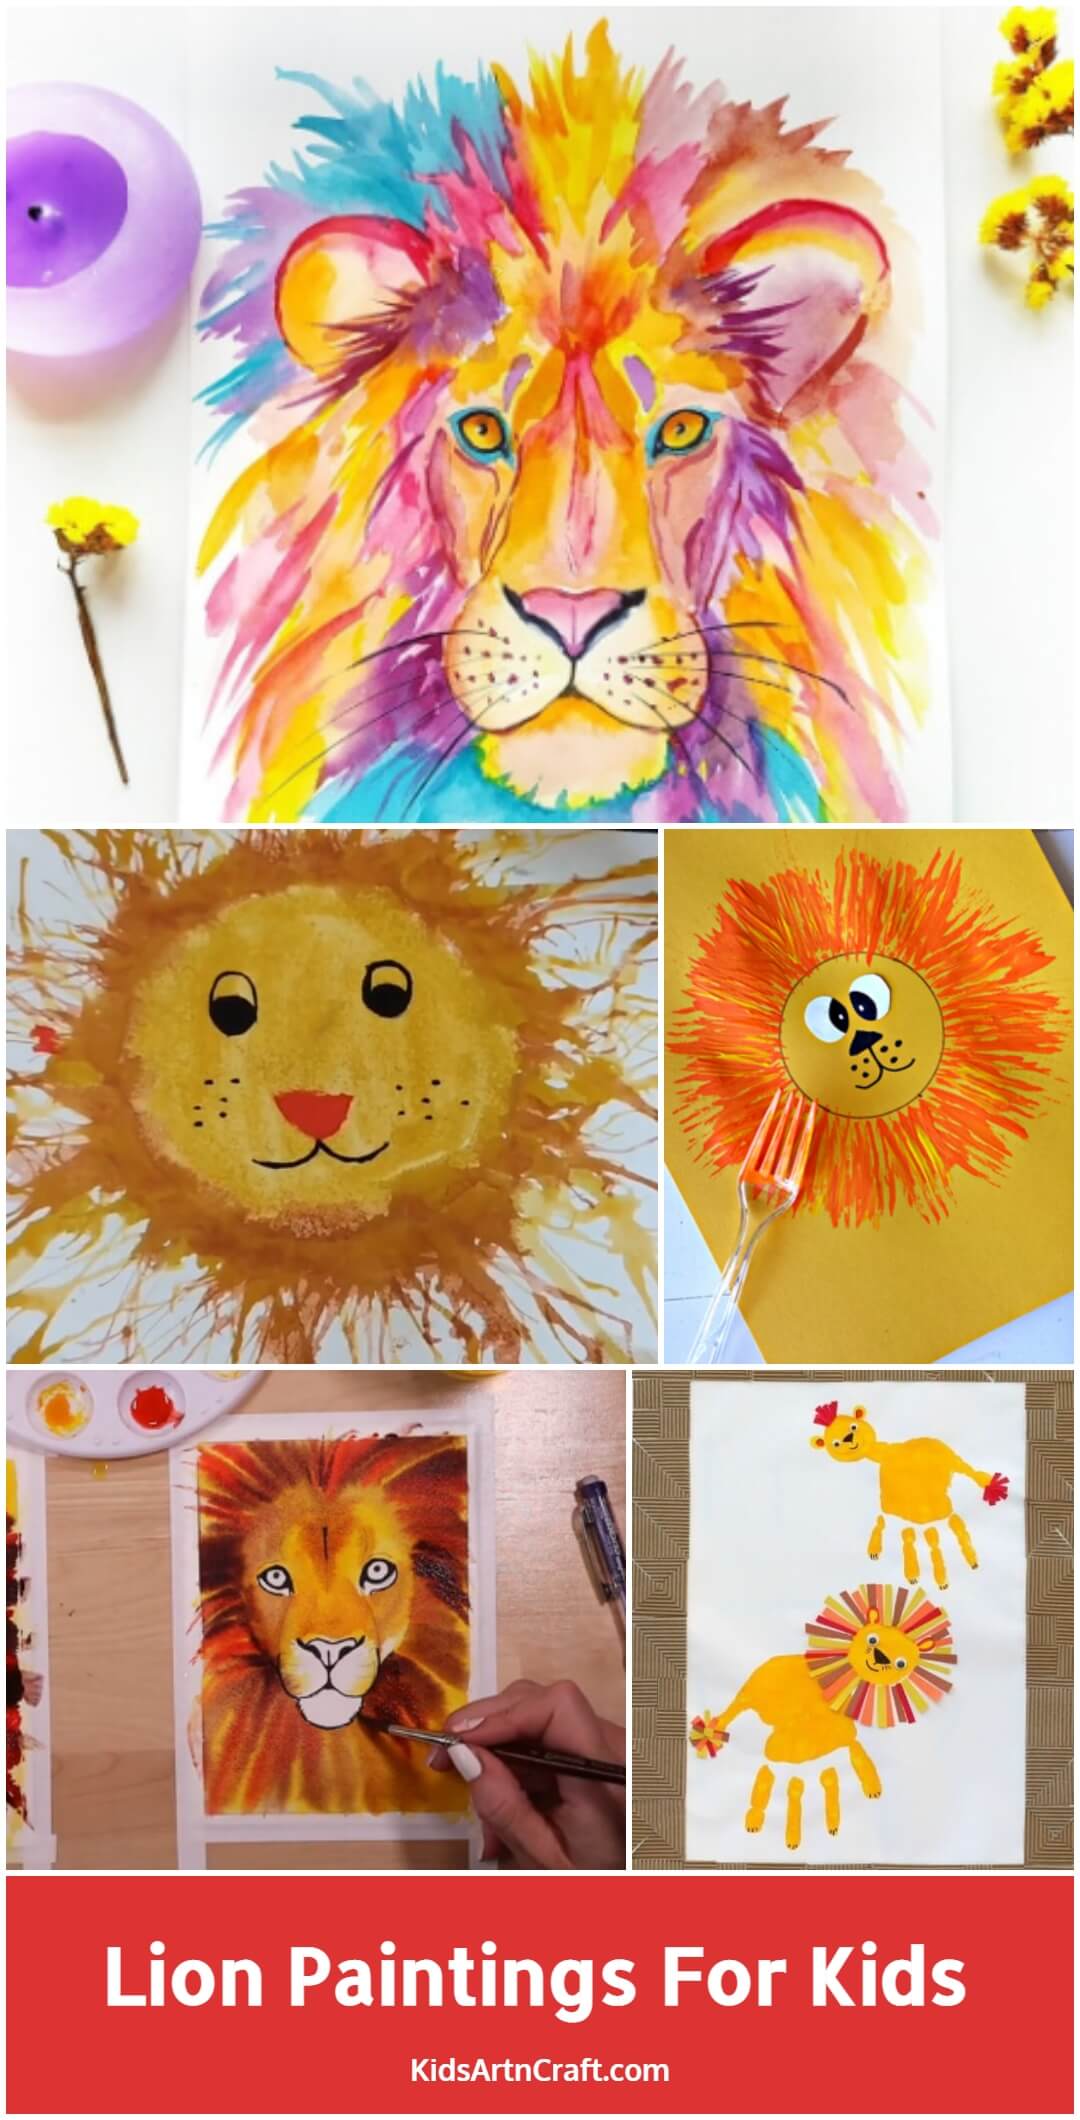 Lion Paintings For Kids